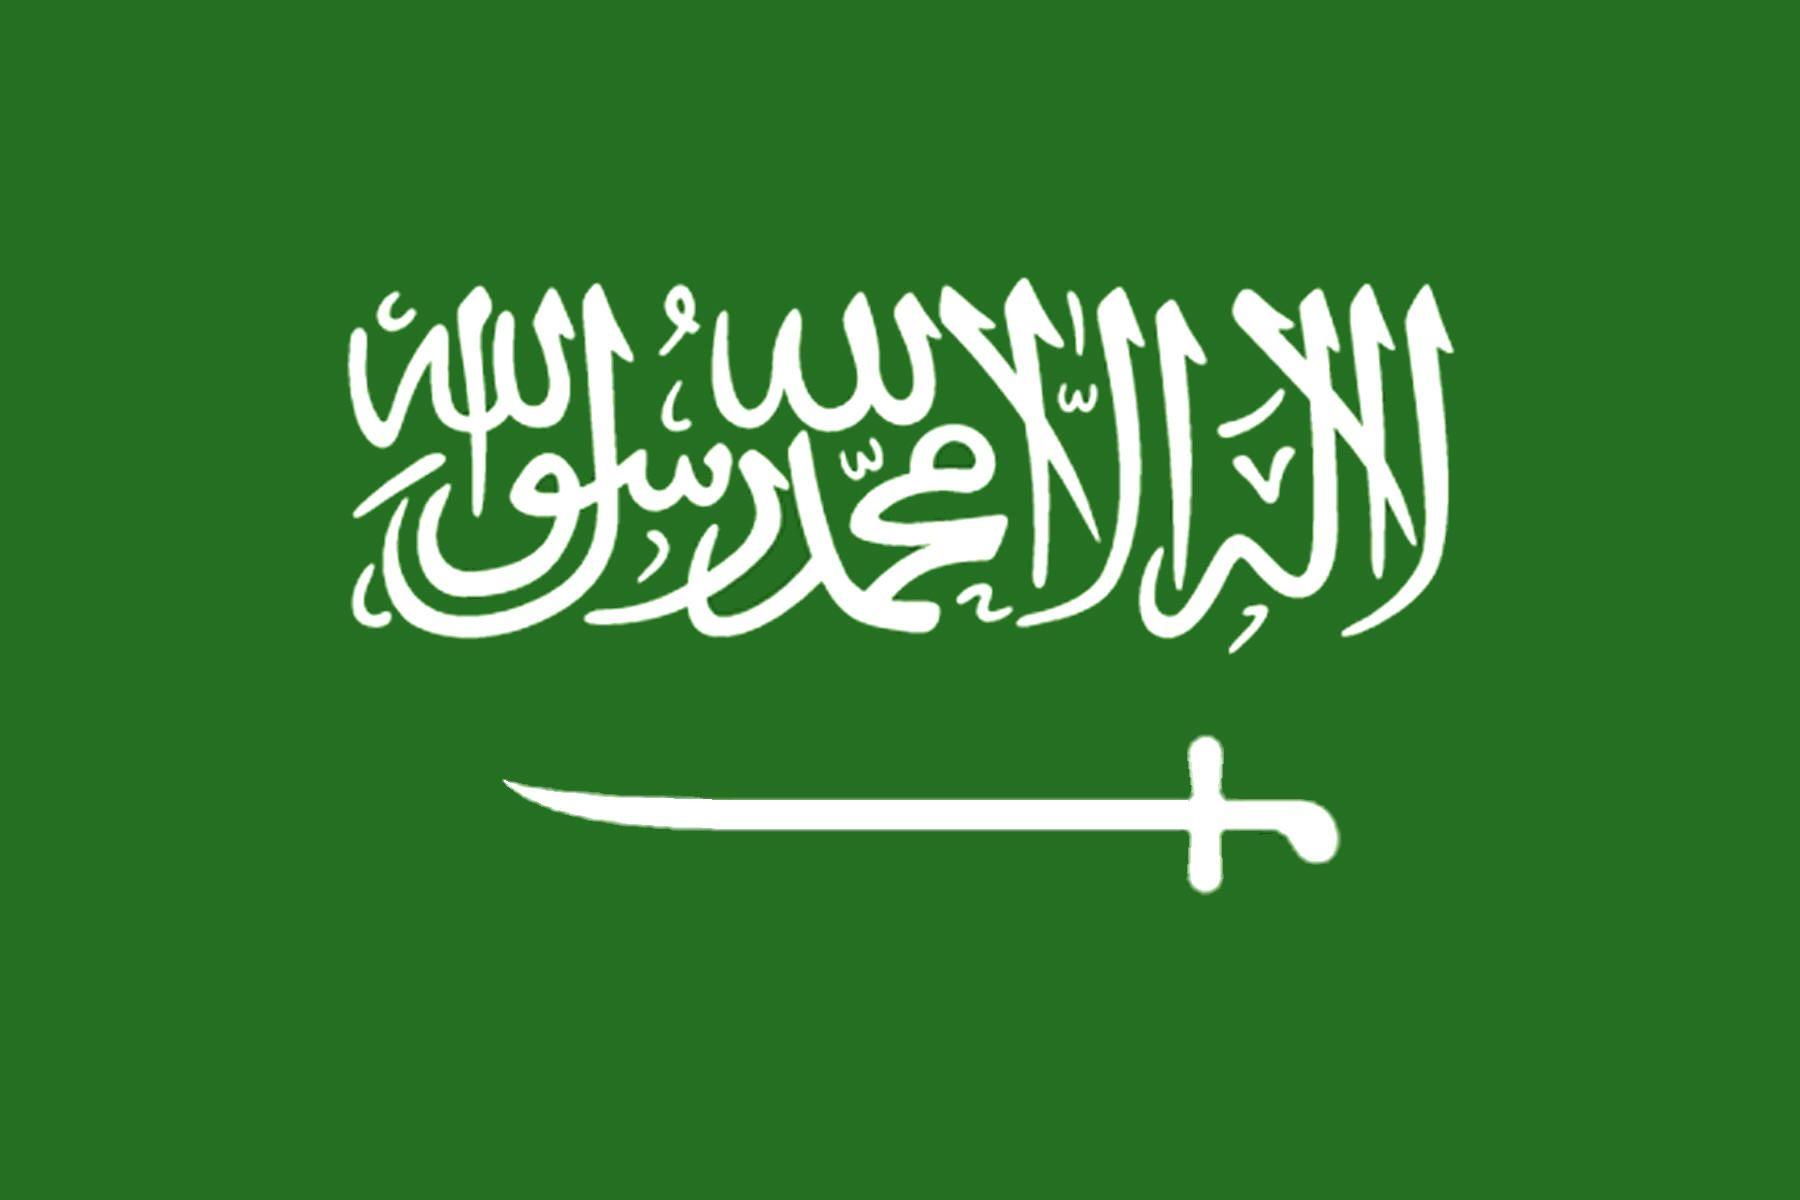 Saudi Arabia Flag HD picture. Travel picture and Travel guides